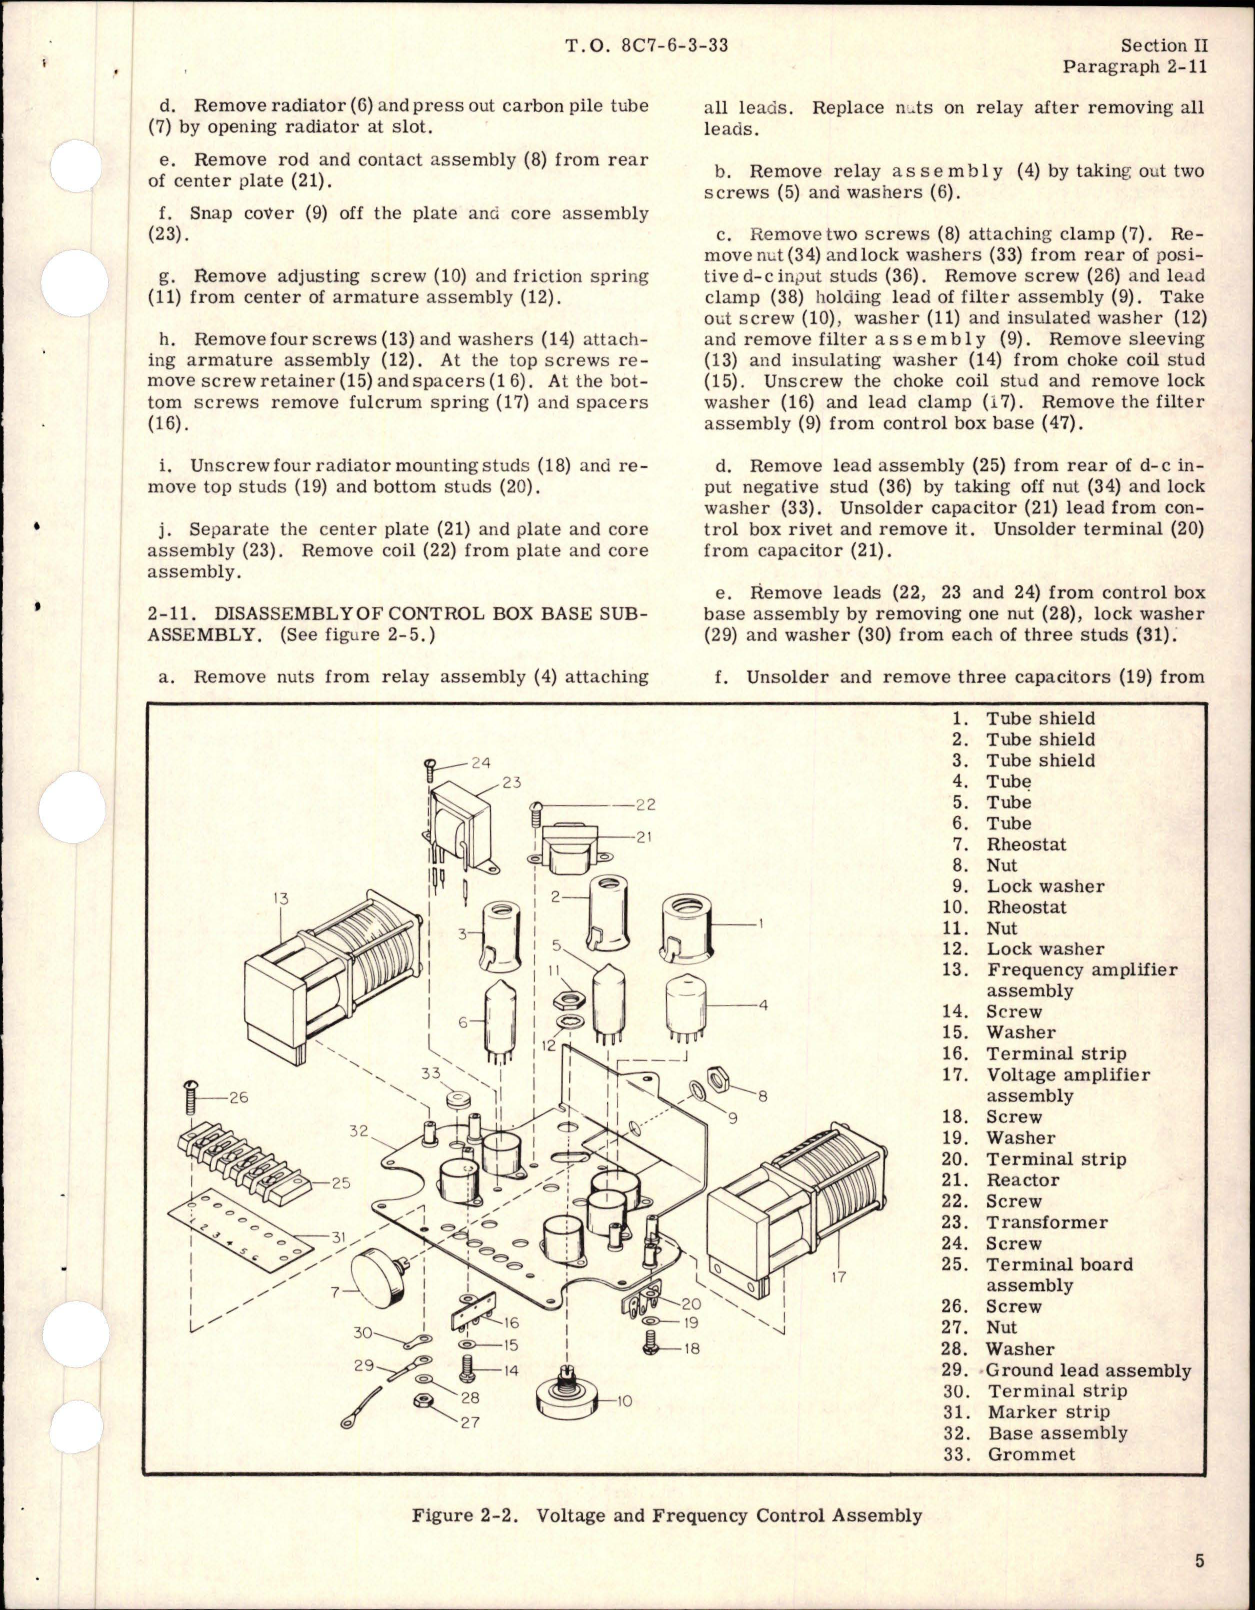 Sample page 9 from AirCorps Library document: Overhaul for Inverter Assembly - AN 3515-1 - Parts SD-135-4 and SD-135-4A